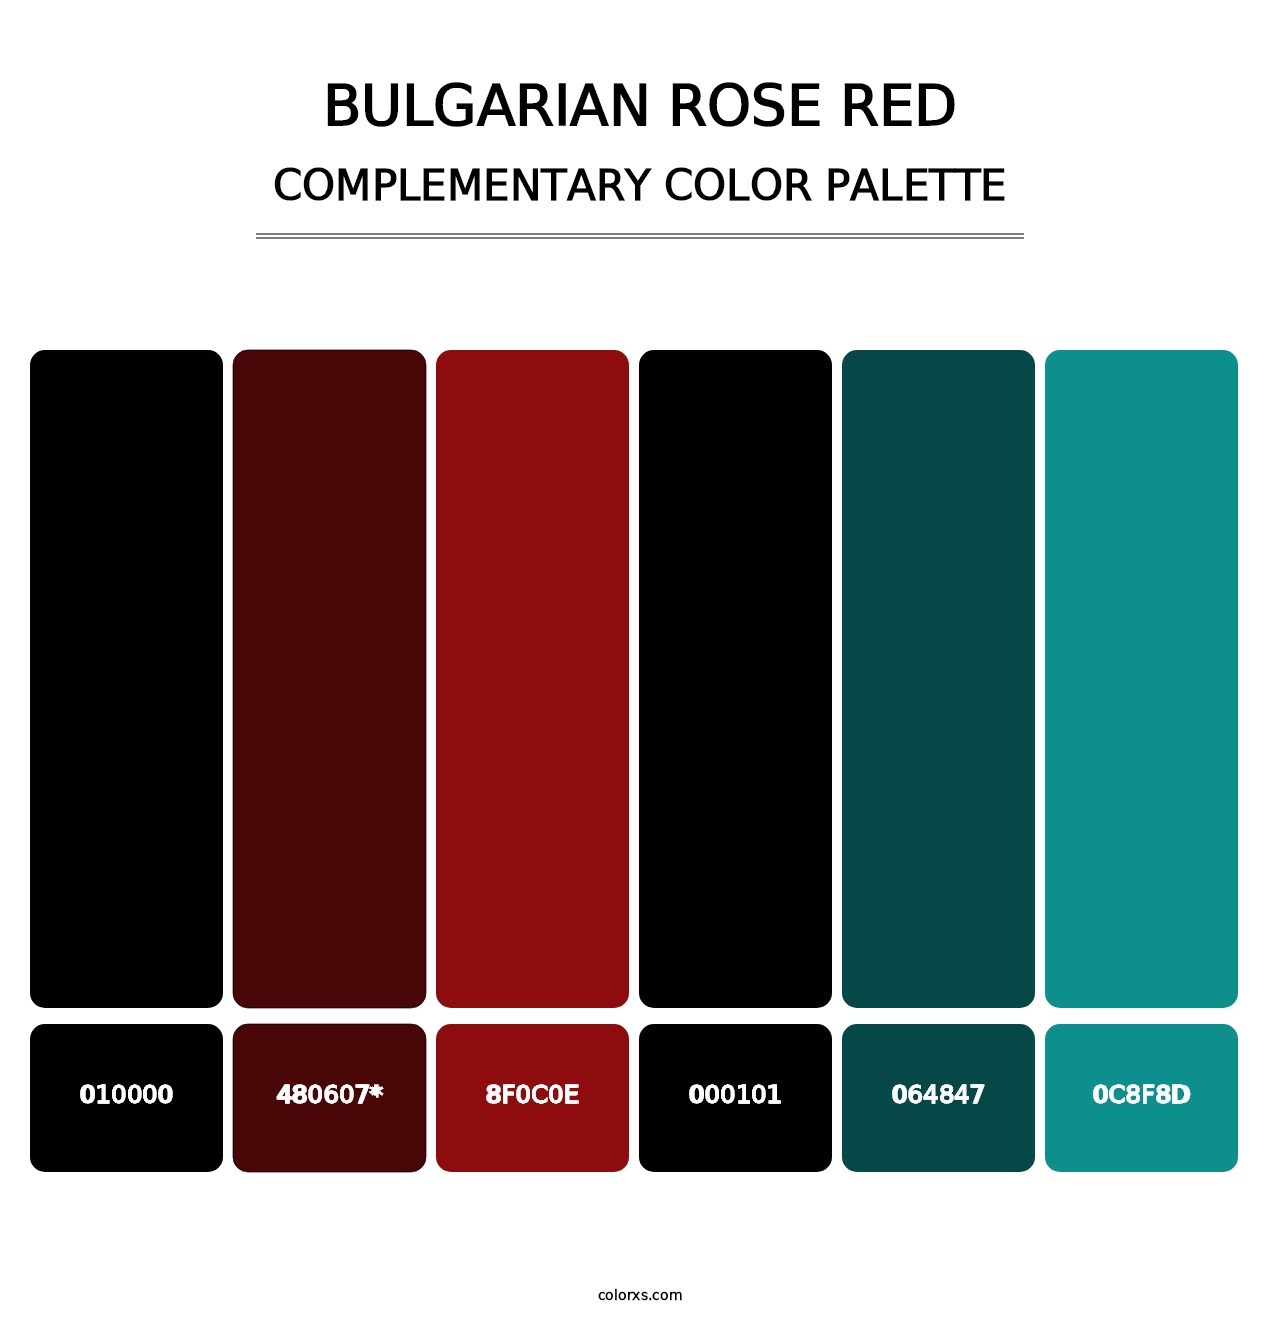 Bulgarian Rose Red - Complementary Color Palette